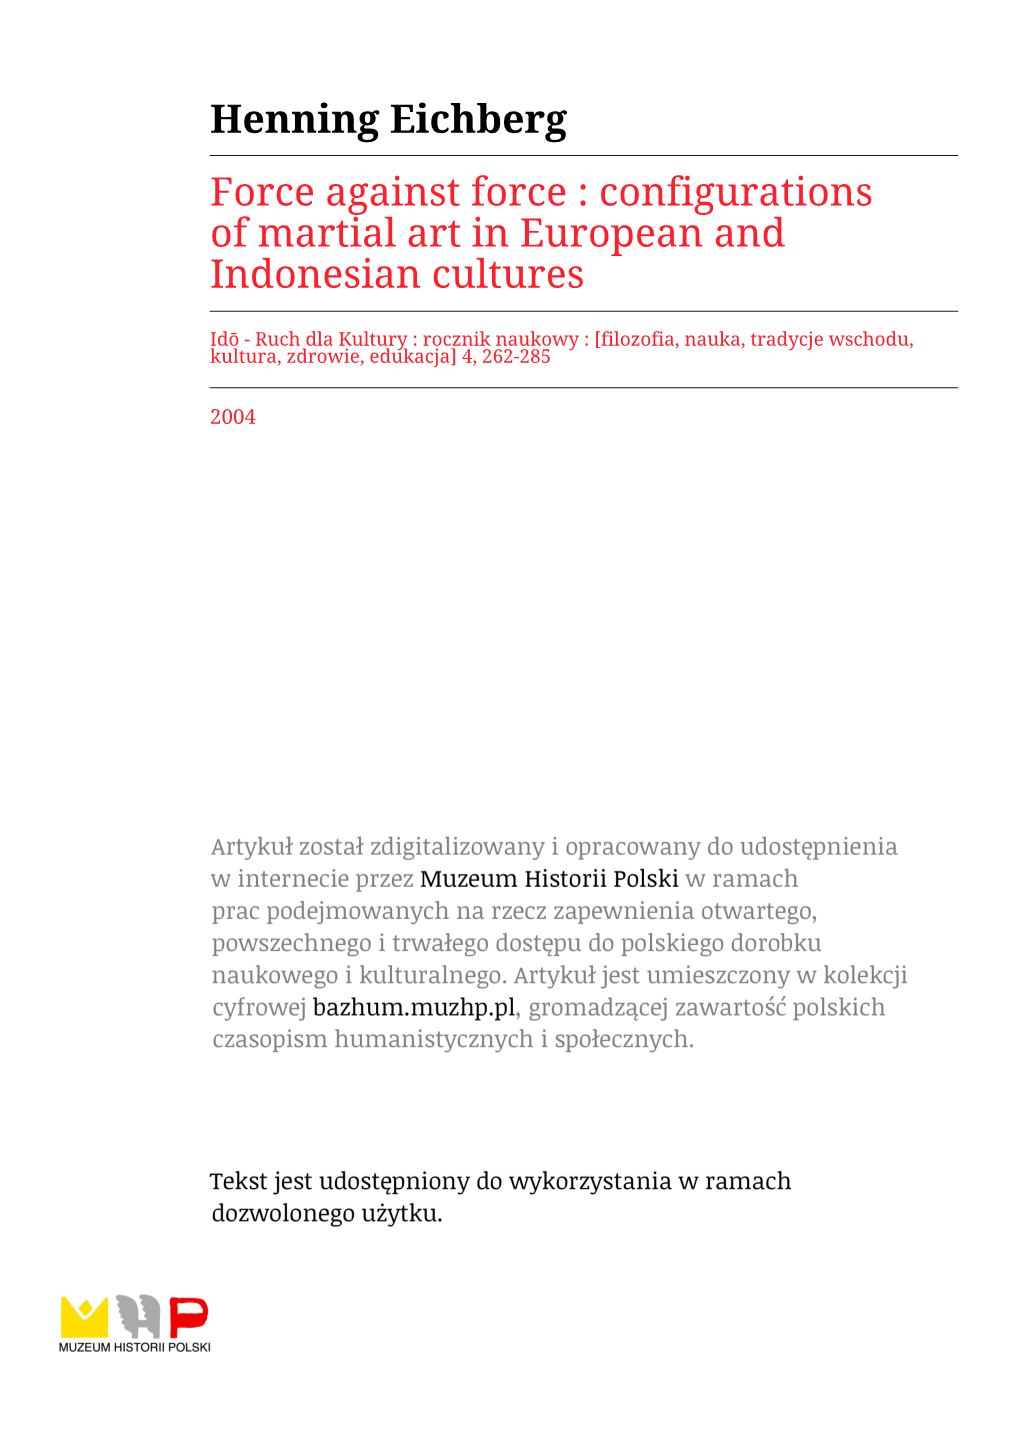 Henning Eichberg Force Against Force : Configurations of Martial Art in European and Indonesian Cultures